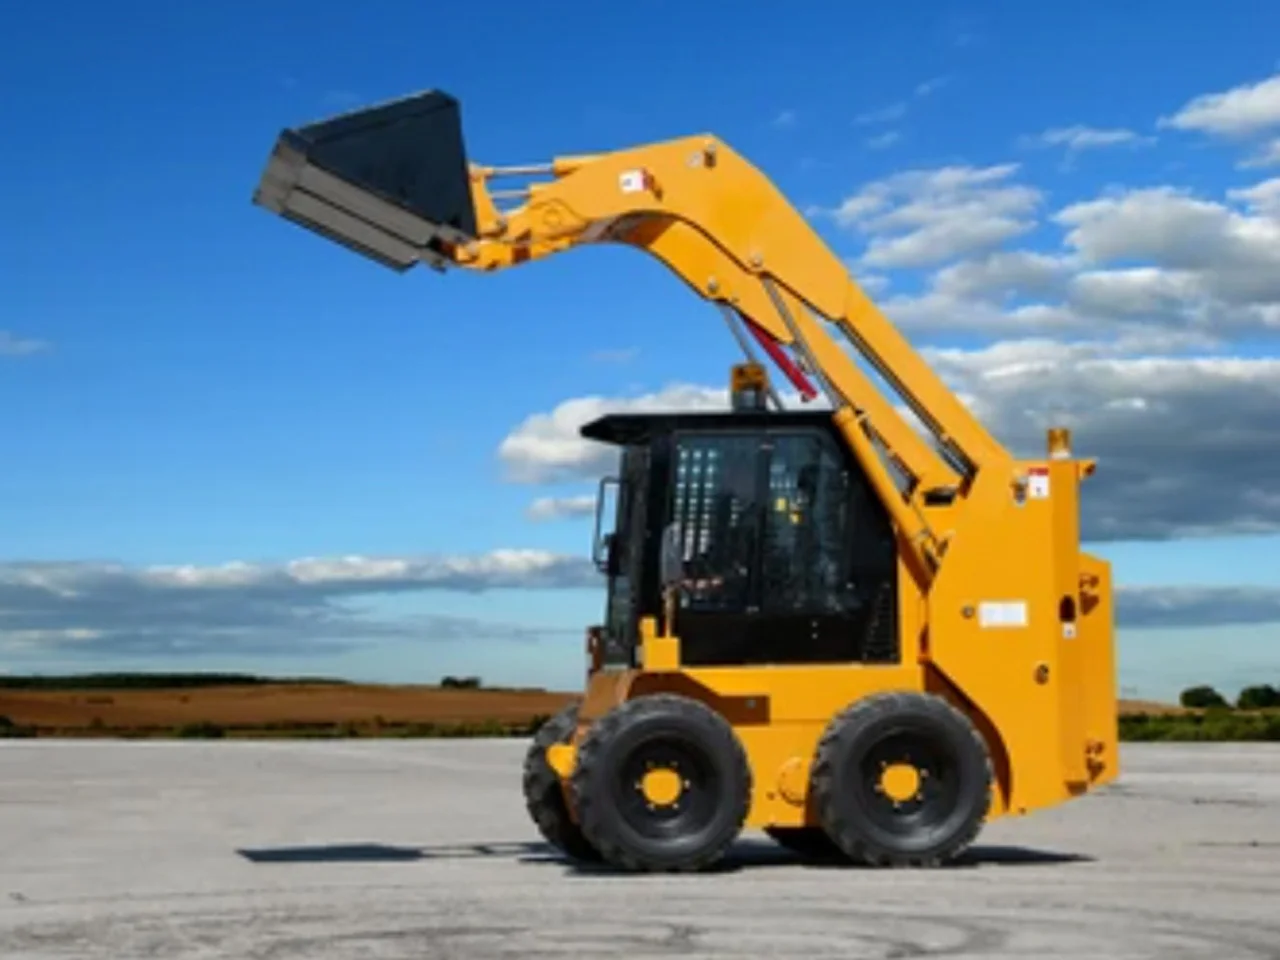 a comprehensive introduction to the skid steer